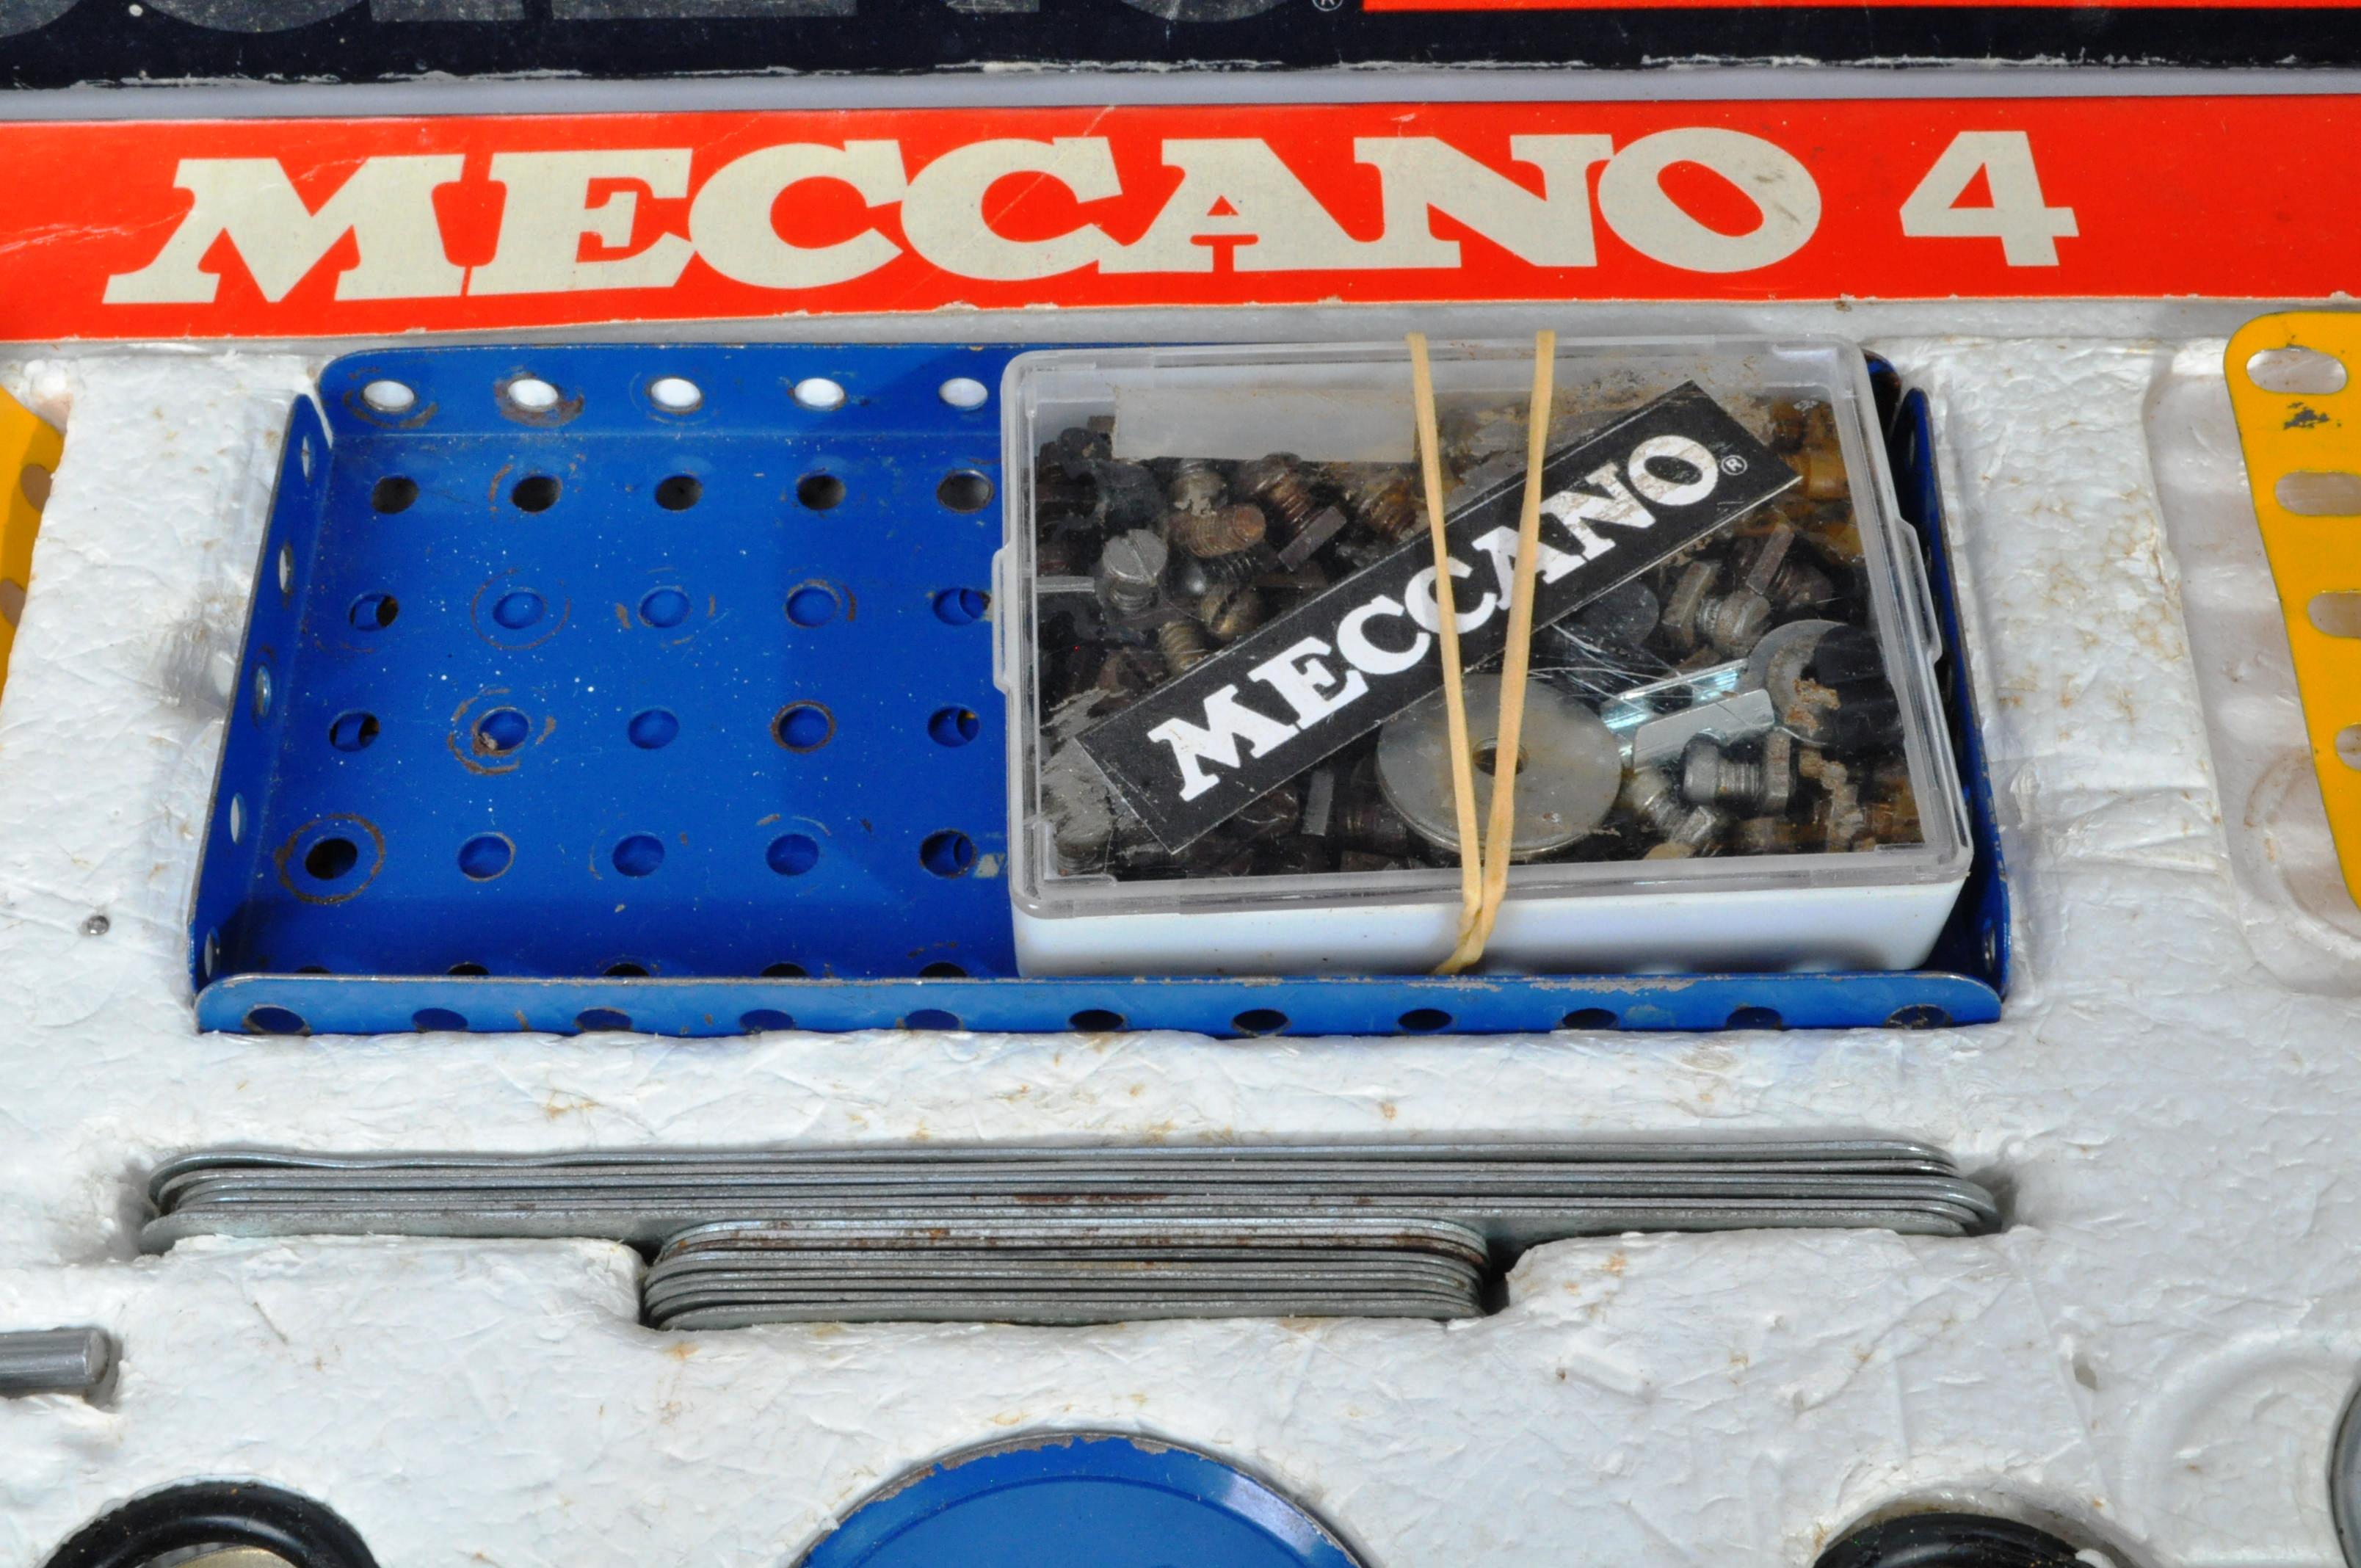 TWO VINTAGE MECCANO CONSTRUCTOR SETS - Image 6 of 12